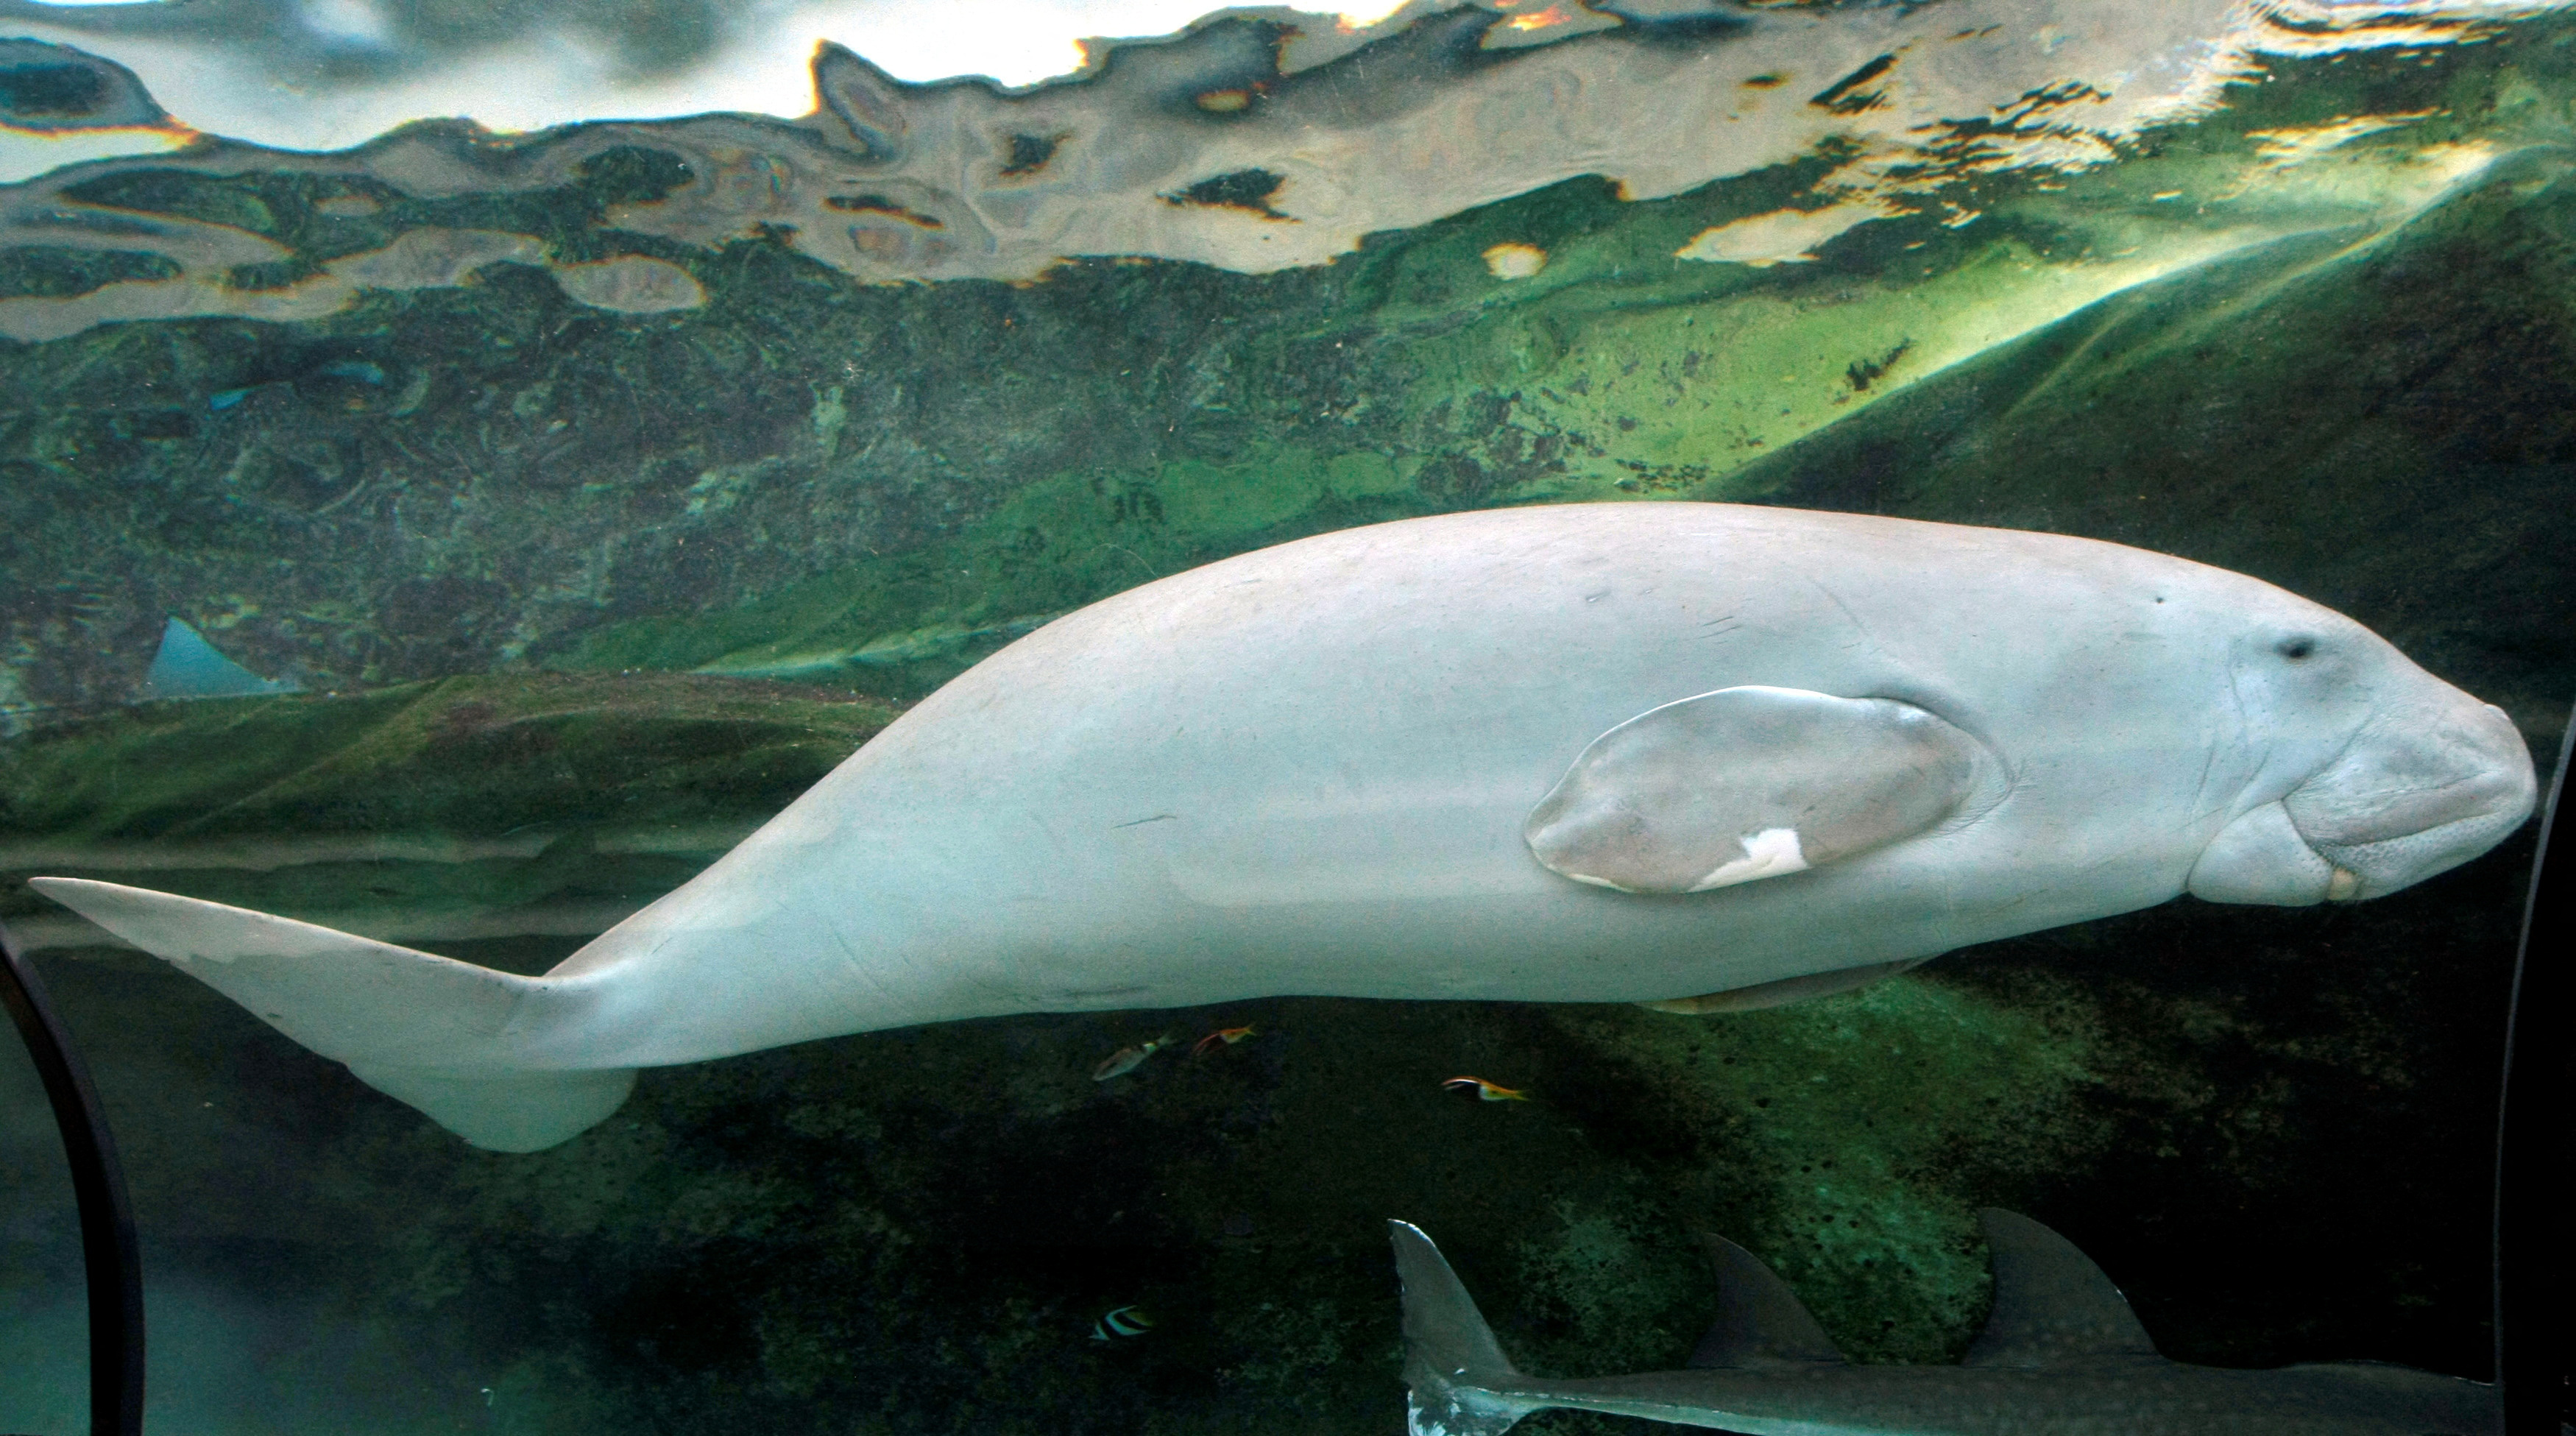 "Wuru," a four-year-old female Dugong, swims in her tank at the Sydney Aquarium